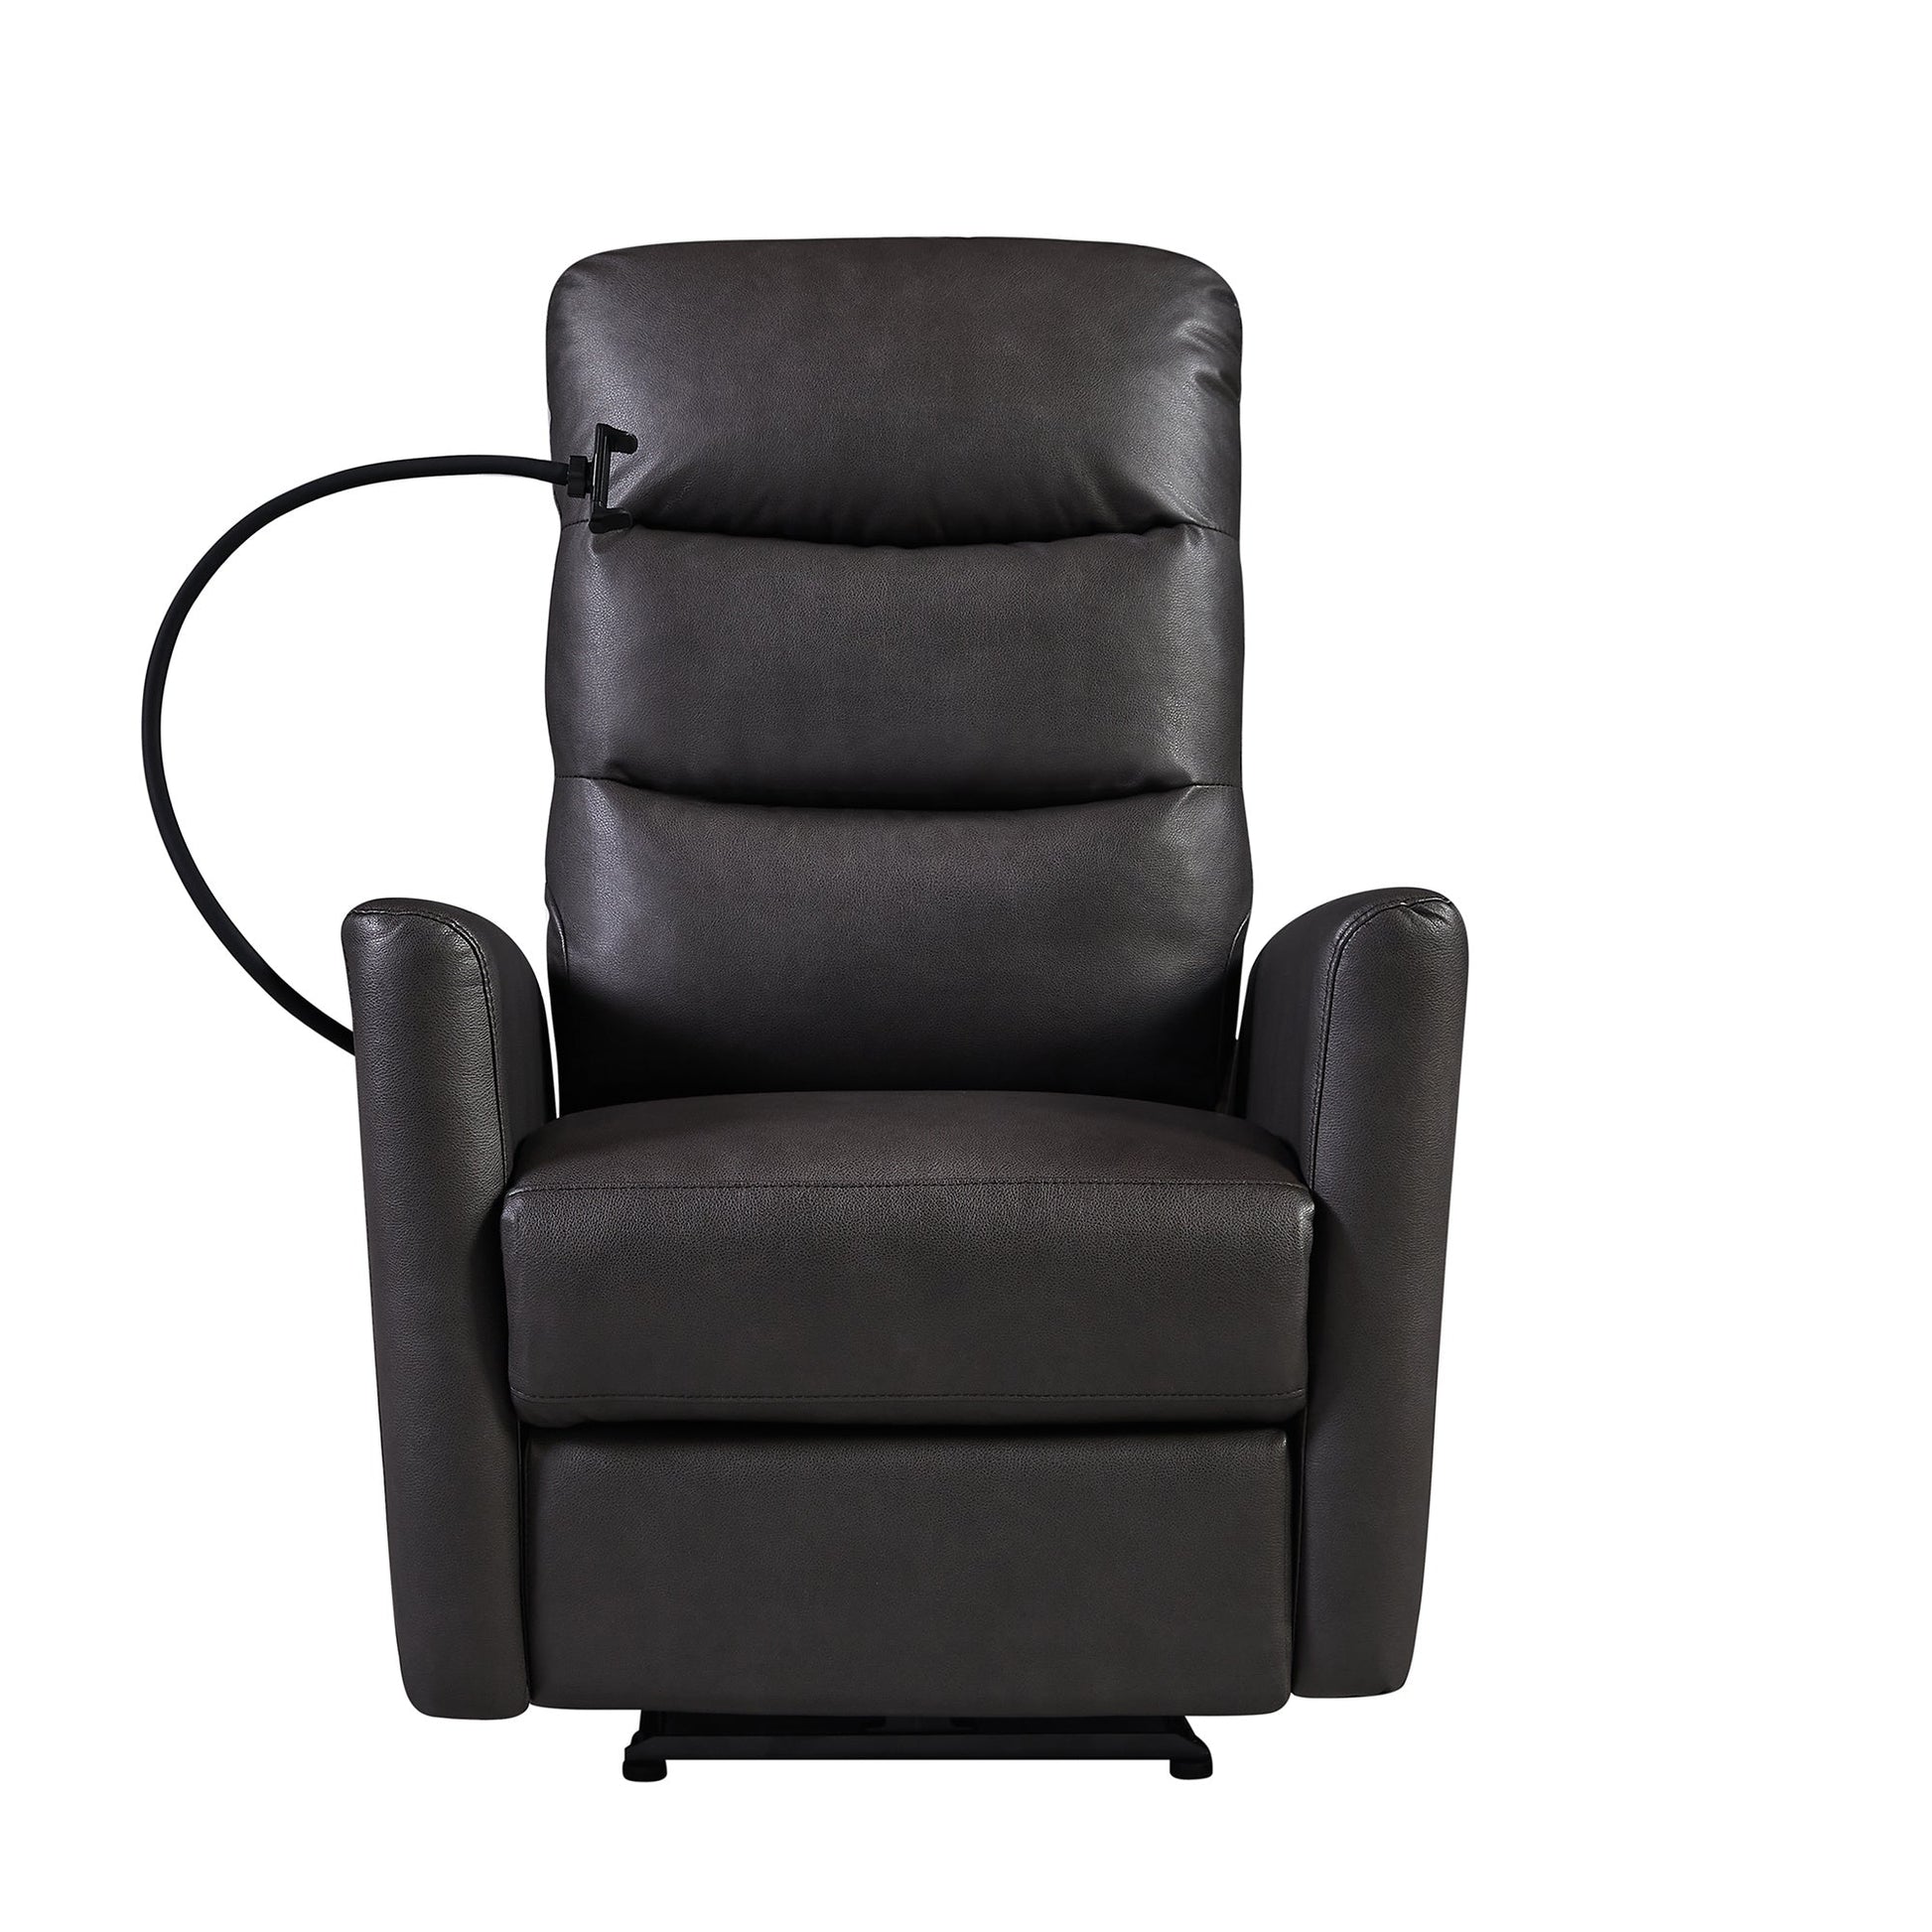 Hot selling For 10 Years ,Recliner Chair With Power function easy control big stocks , Recliner Single Chair For Living Room , Bed Room Home Decor by Design